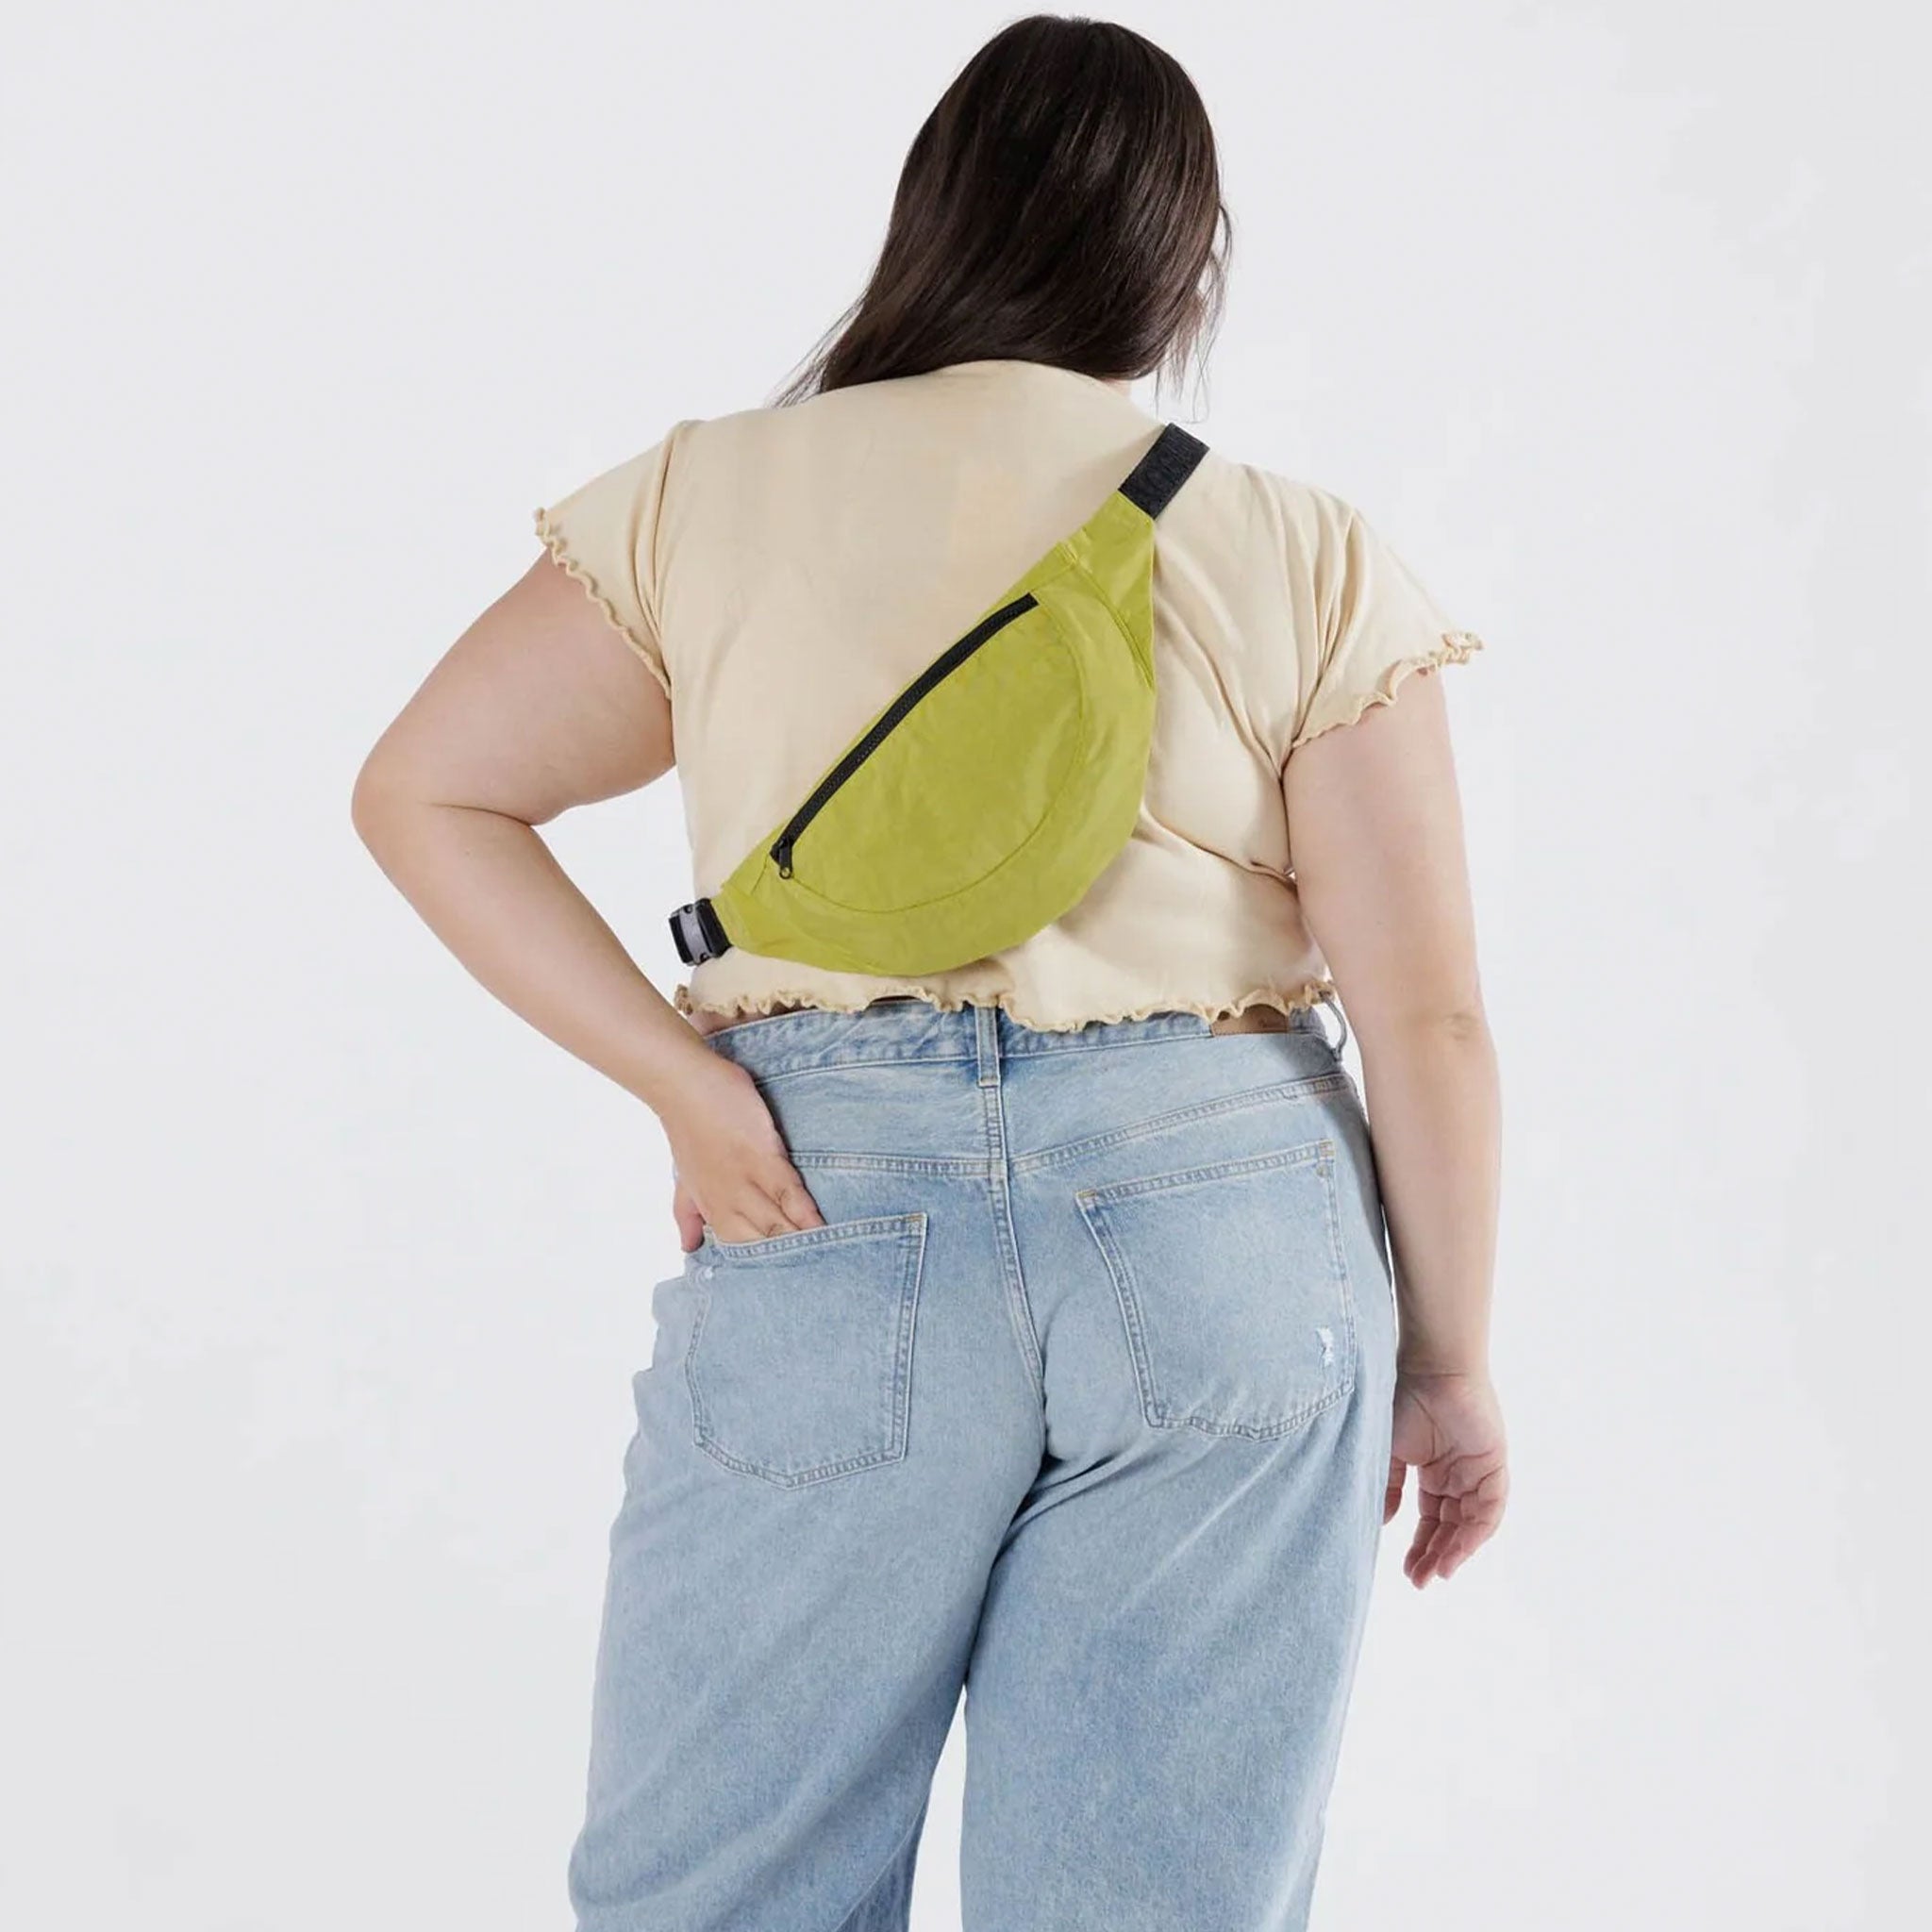 A model wearing a a crescent shaped fanny pack in lime green color with black strap.